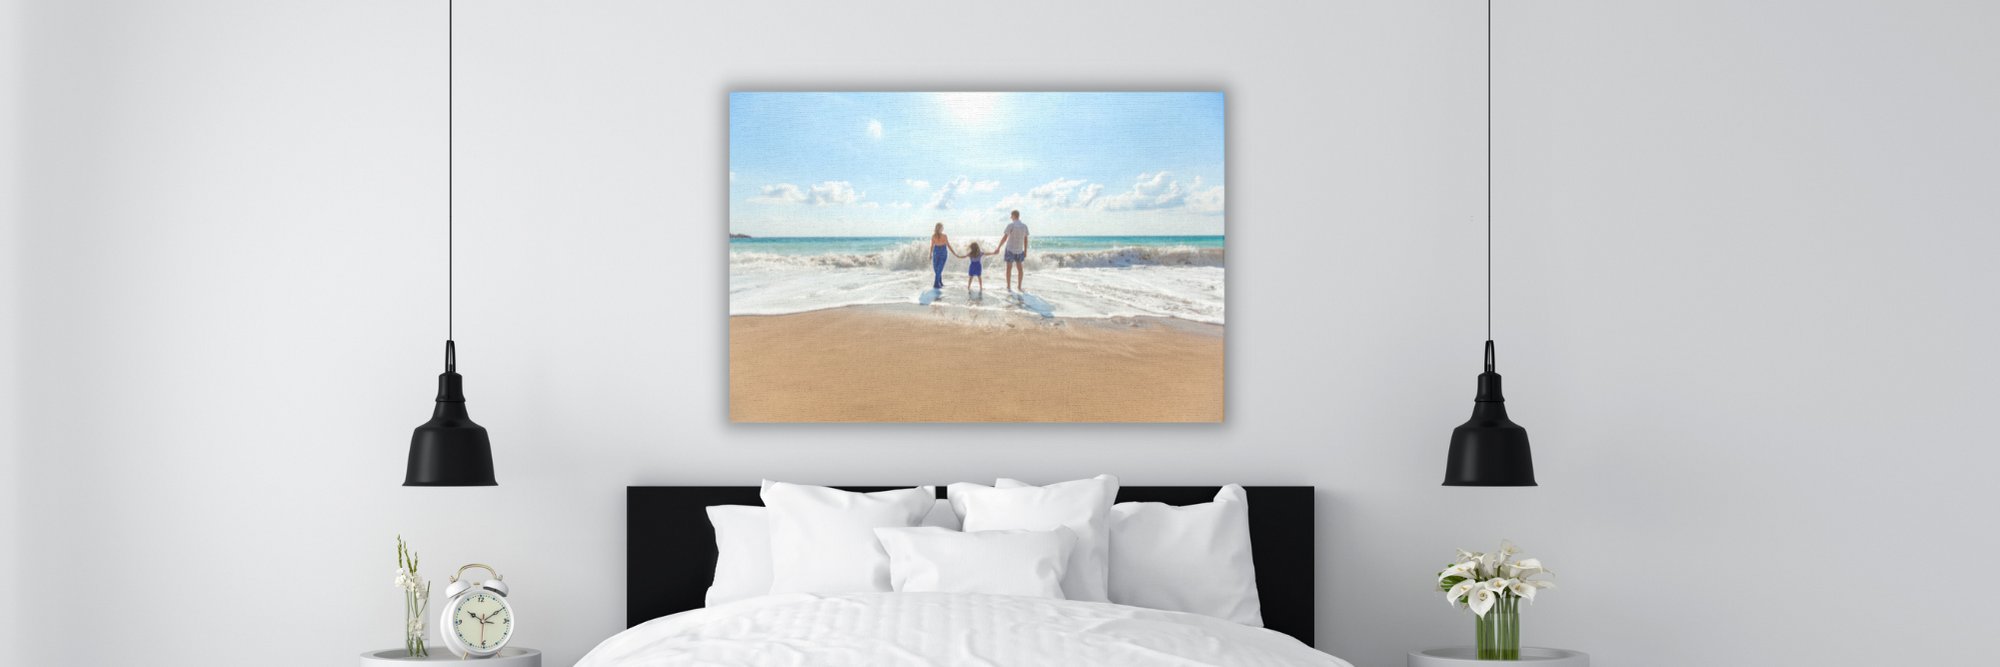 Canvas Prints for homes, offices and more